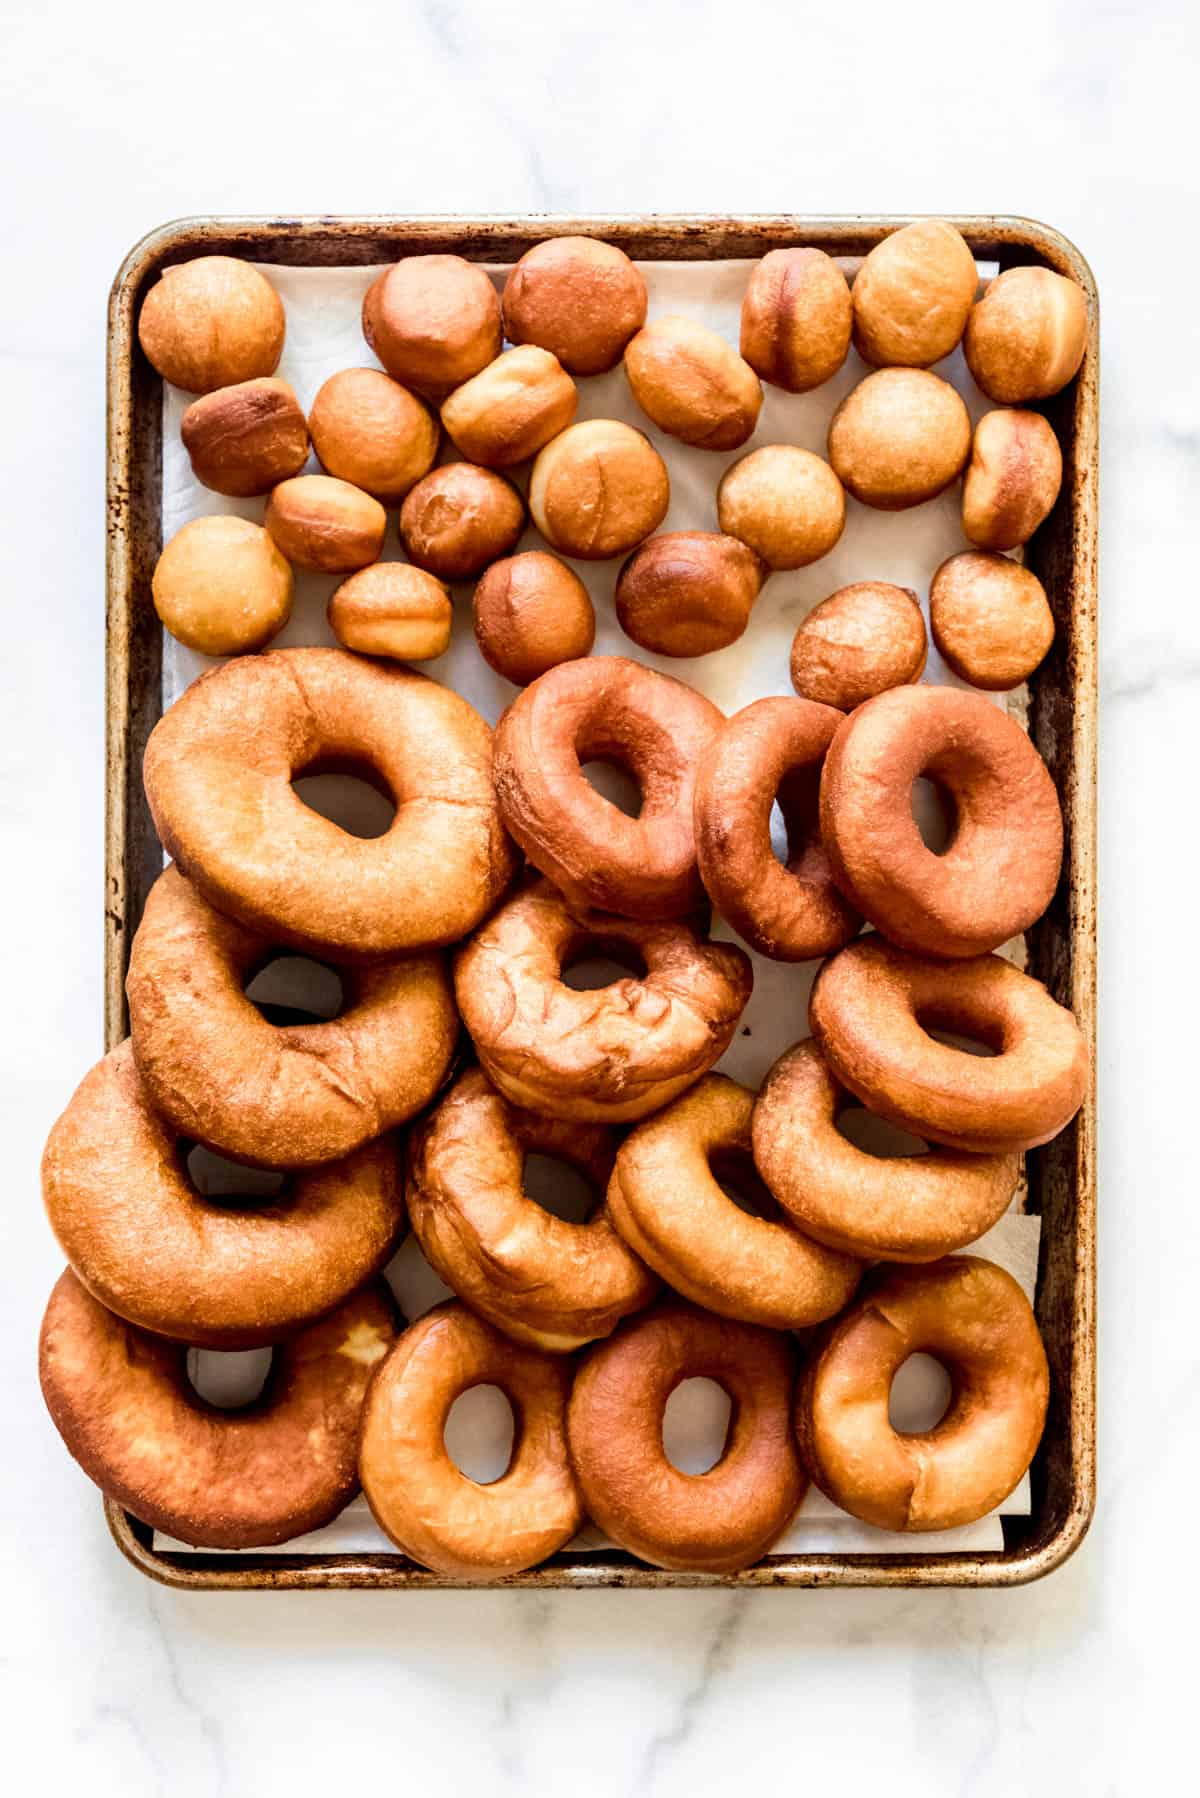 An overhead image of freshly fried hot donuts and donut holes on a baking sheet.